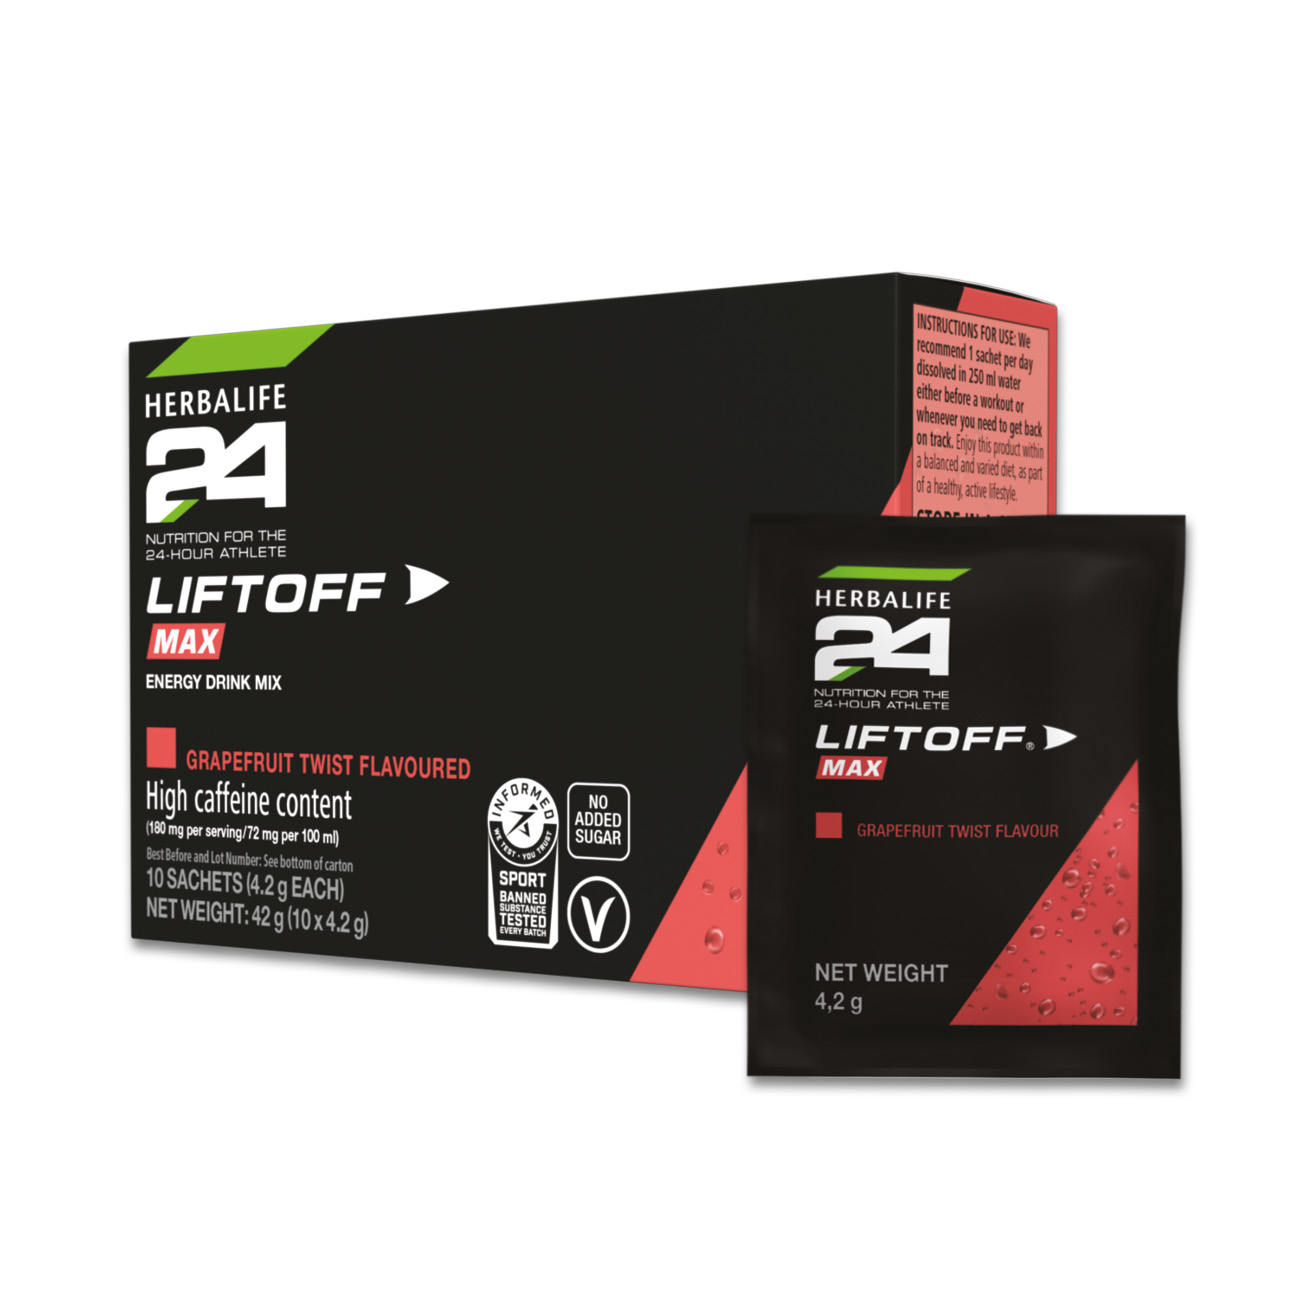 Herbalife24® LiftOff® Max is a sugar-free energy drink that comes in a box of 10 individual sachets and is great to have when you’re on-the-go.